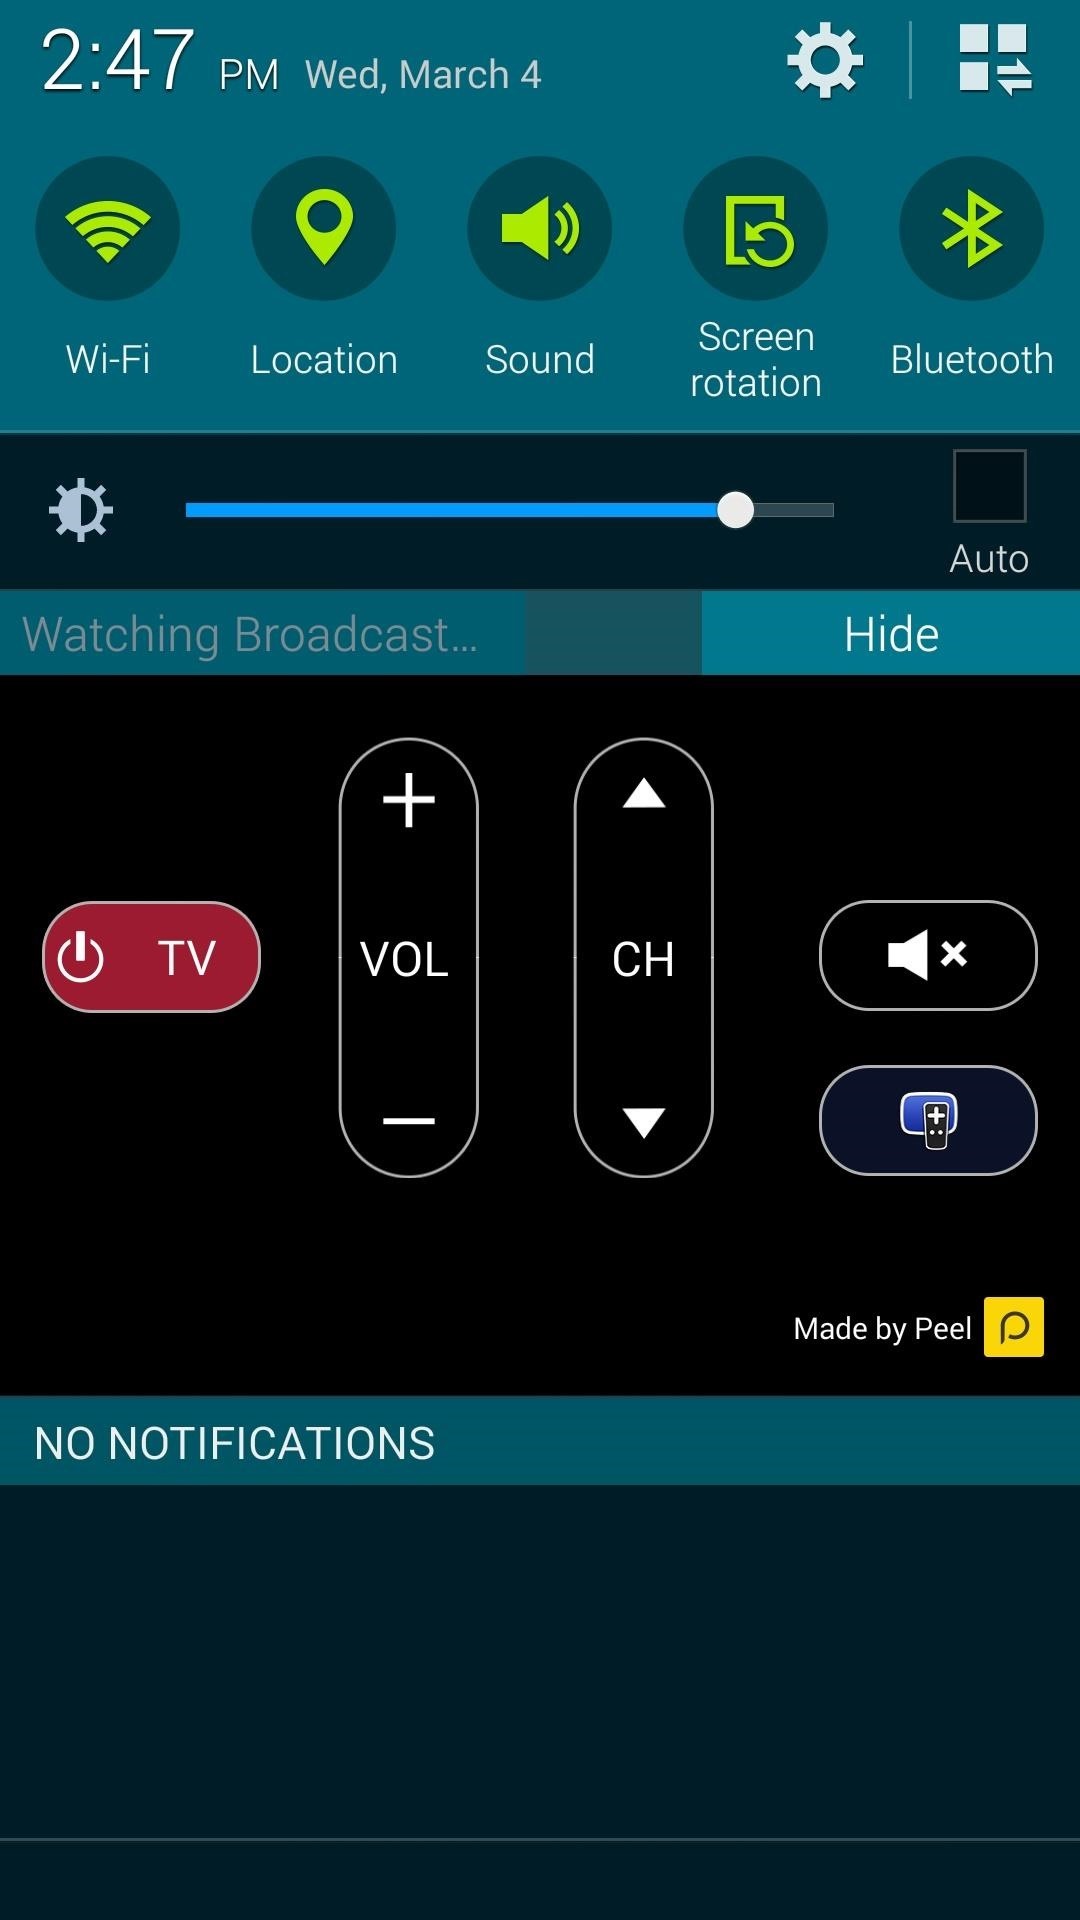 Get the New 'Smart Remote' App from the Samsung Galaxy S6 on Any Galaxy Device